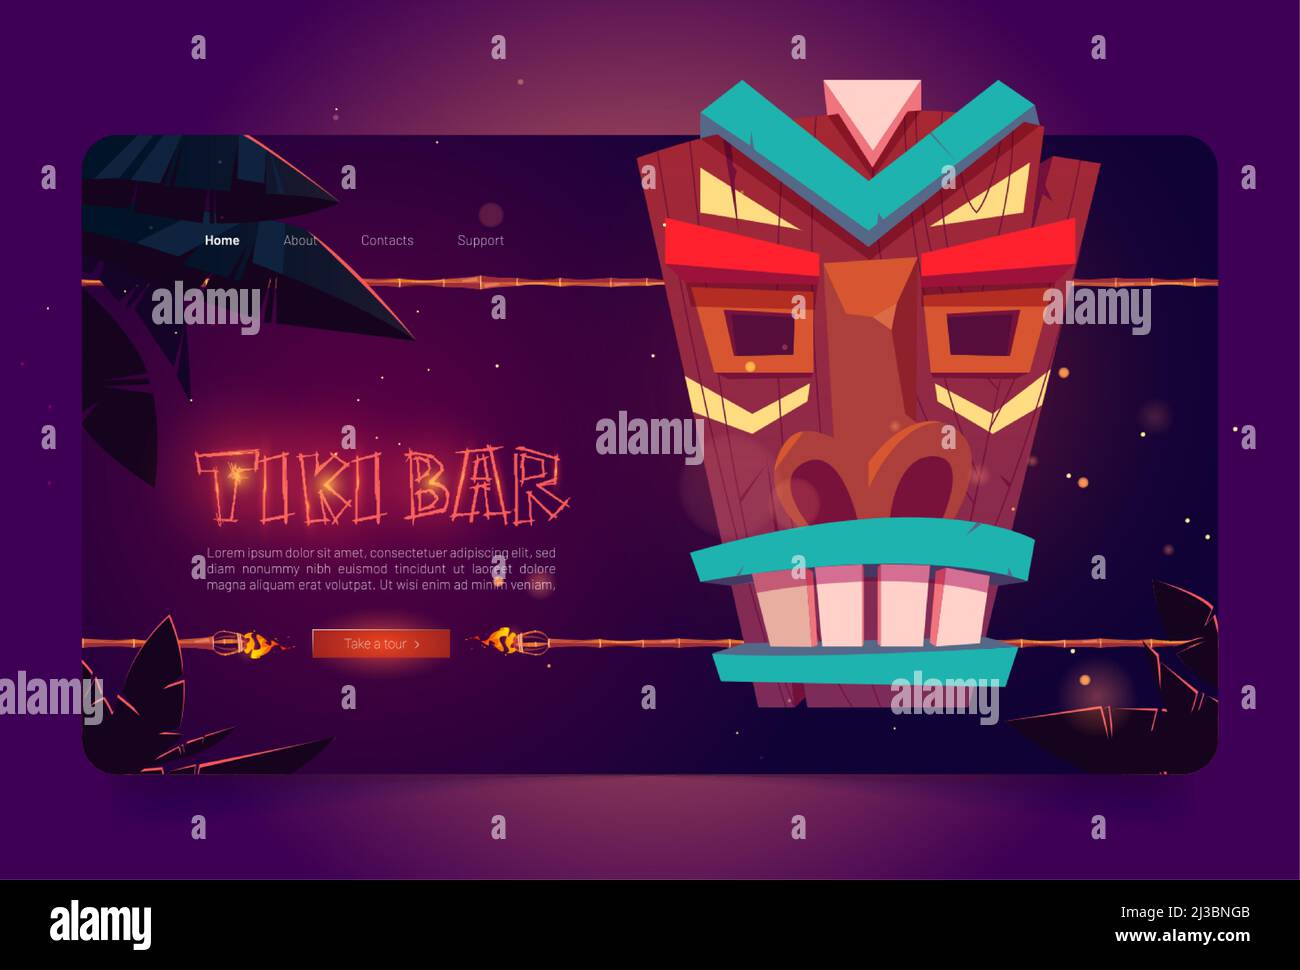 Tiki bar website with wooden tribal mask and burning torches on bamboo stick. Vector landing page of hawaiian beach cafe with cartoon illustration of Stock Vector